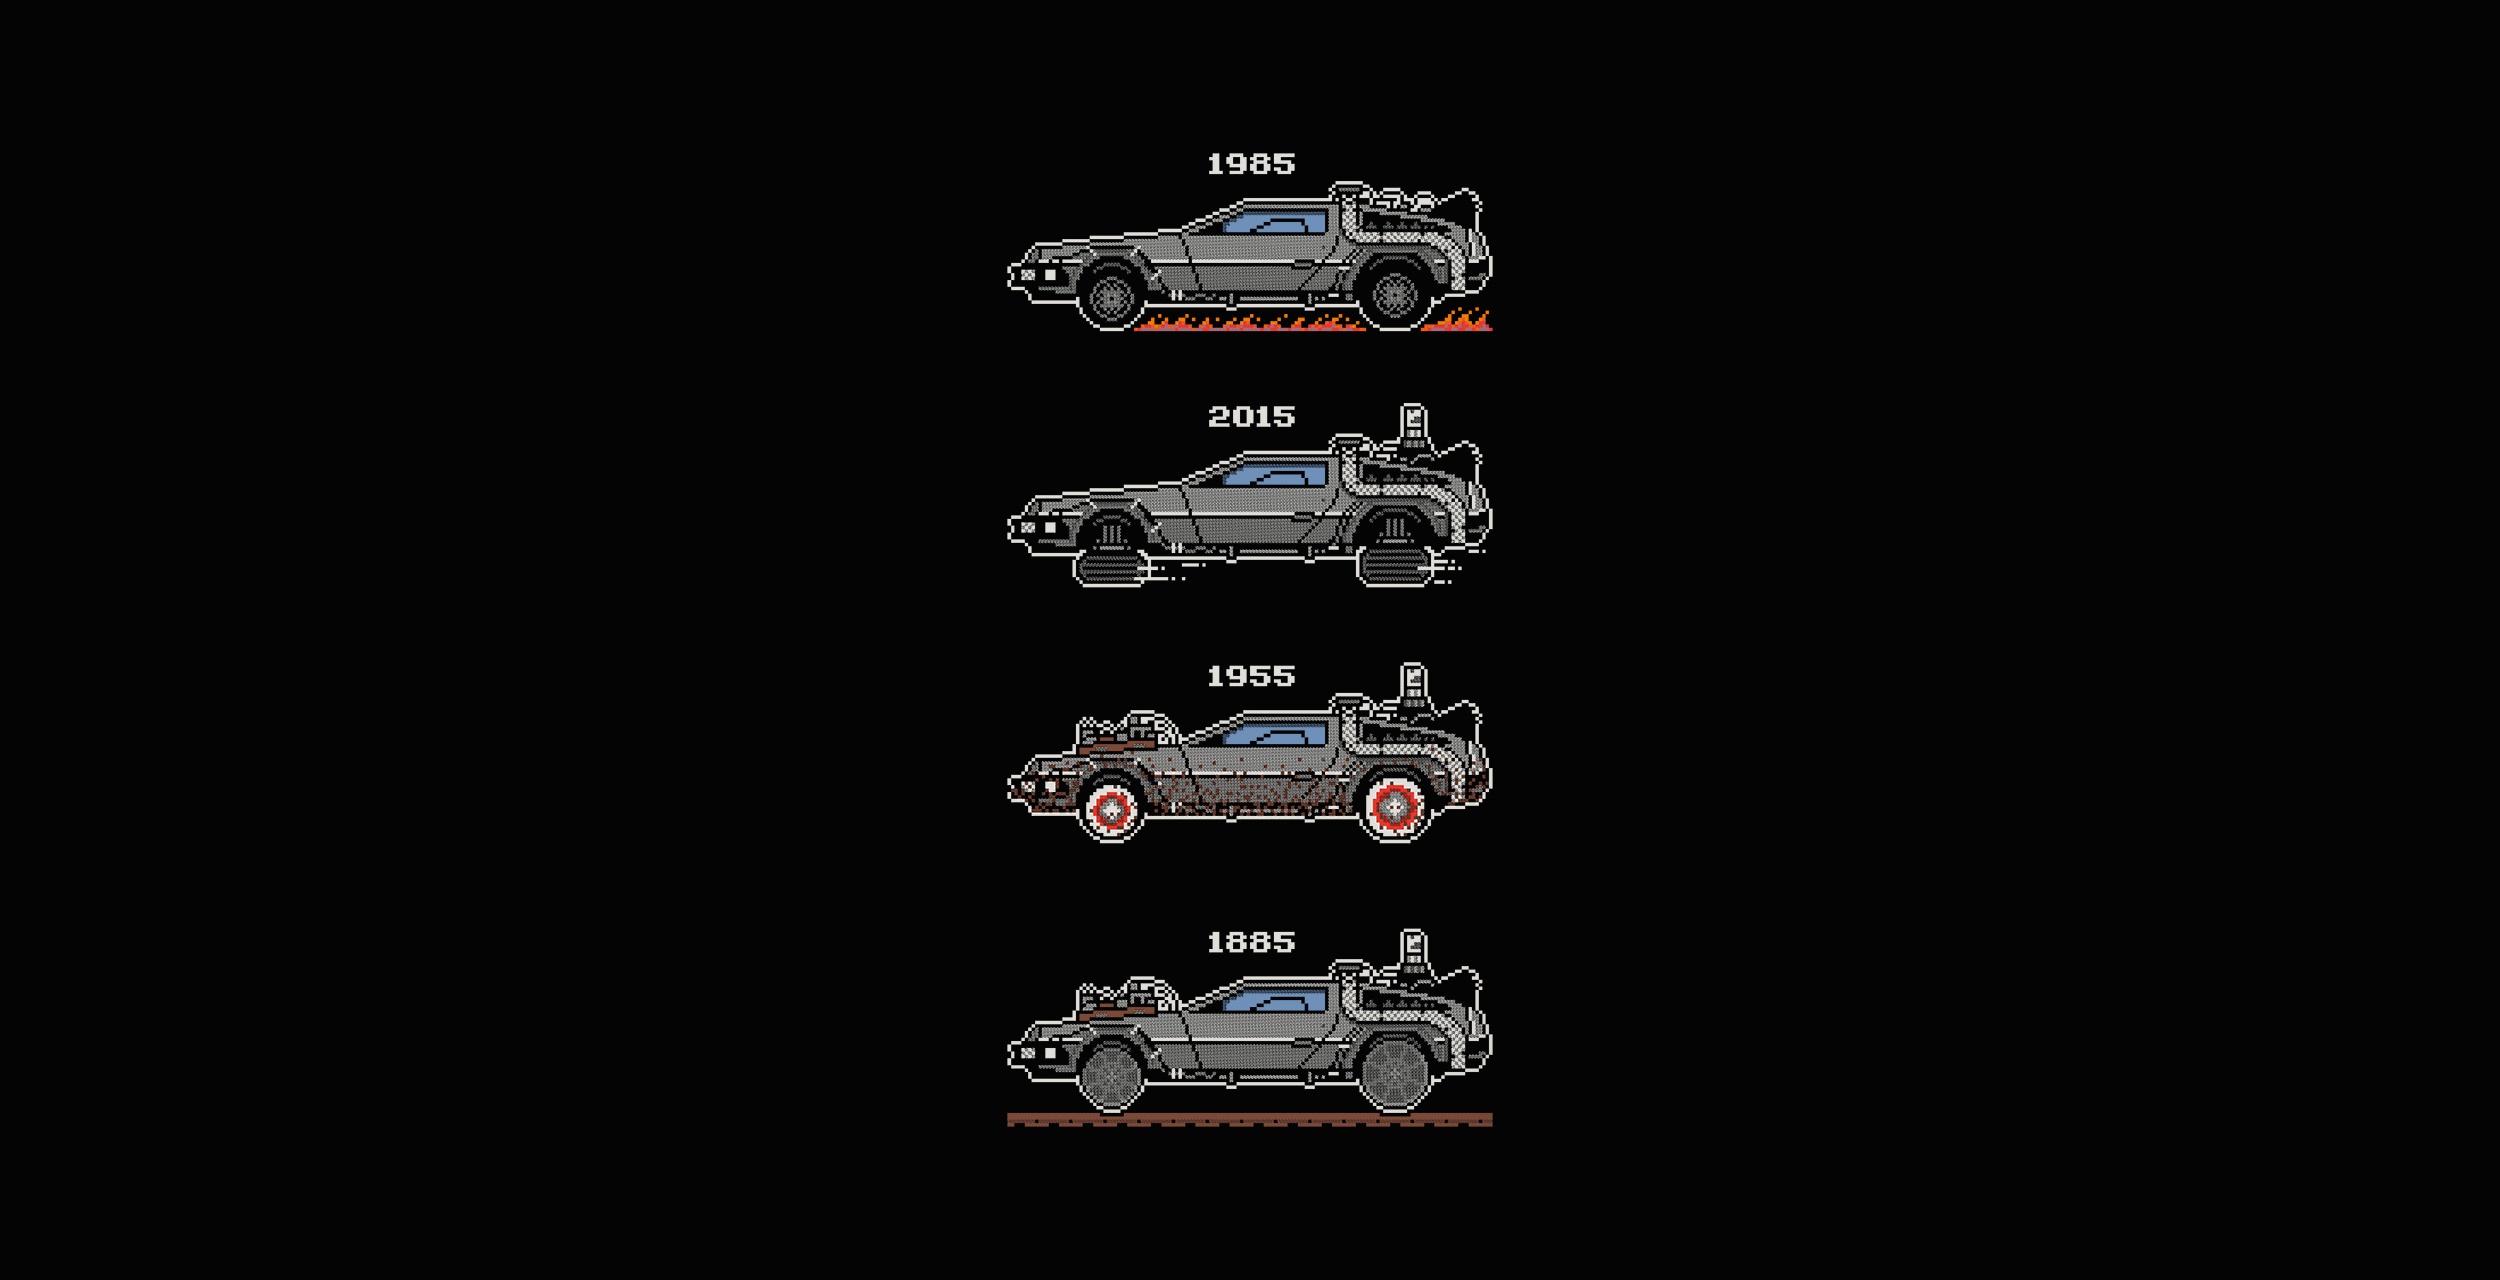 Back To The Future Delorean Car Illustration Wallpapers